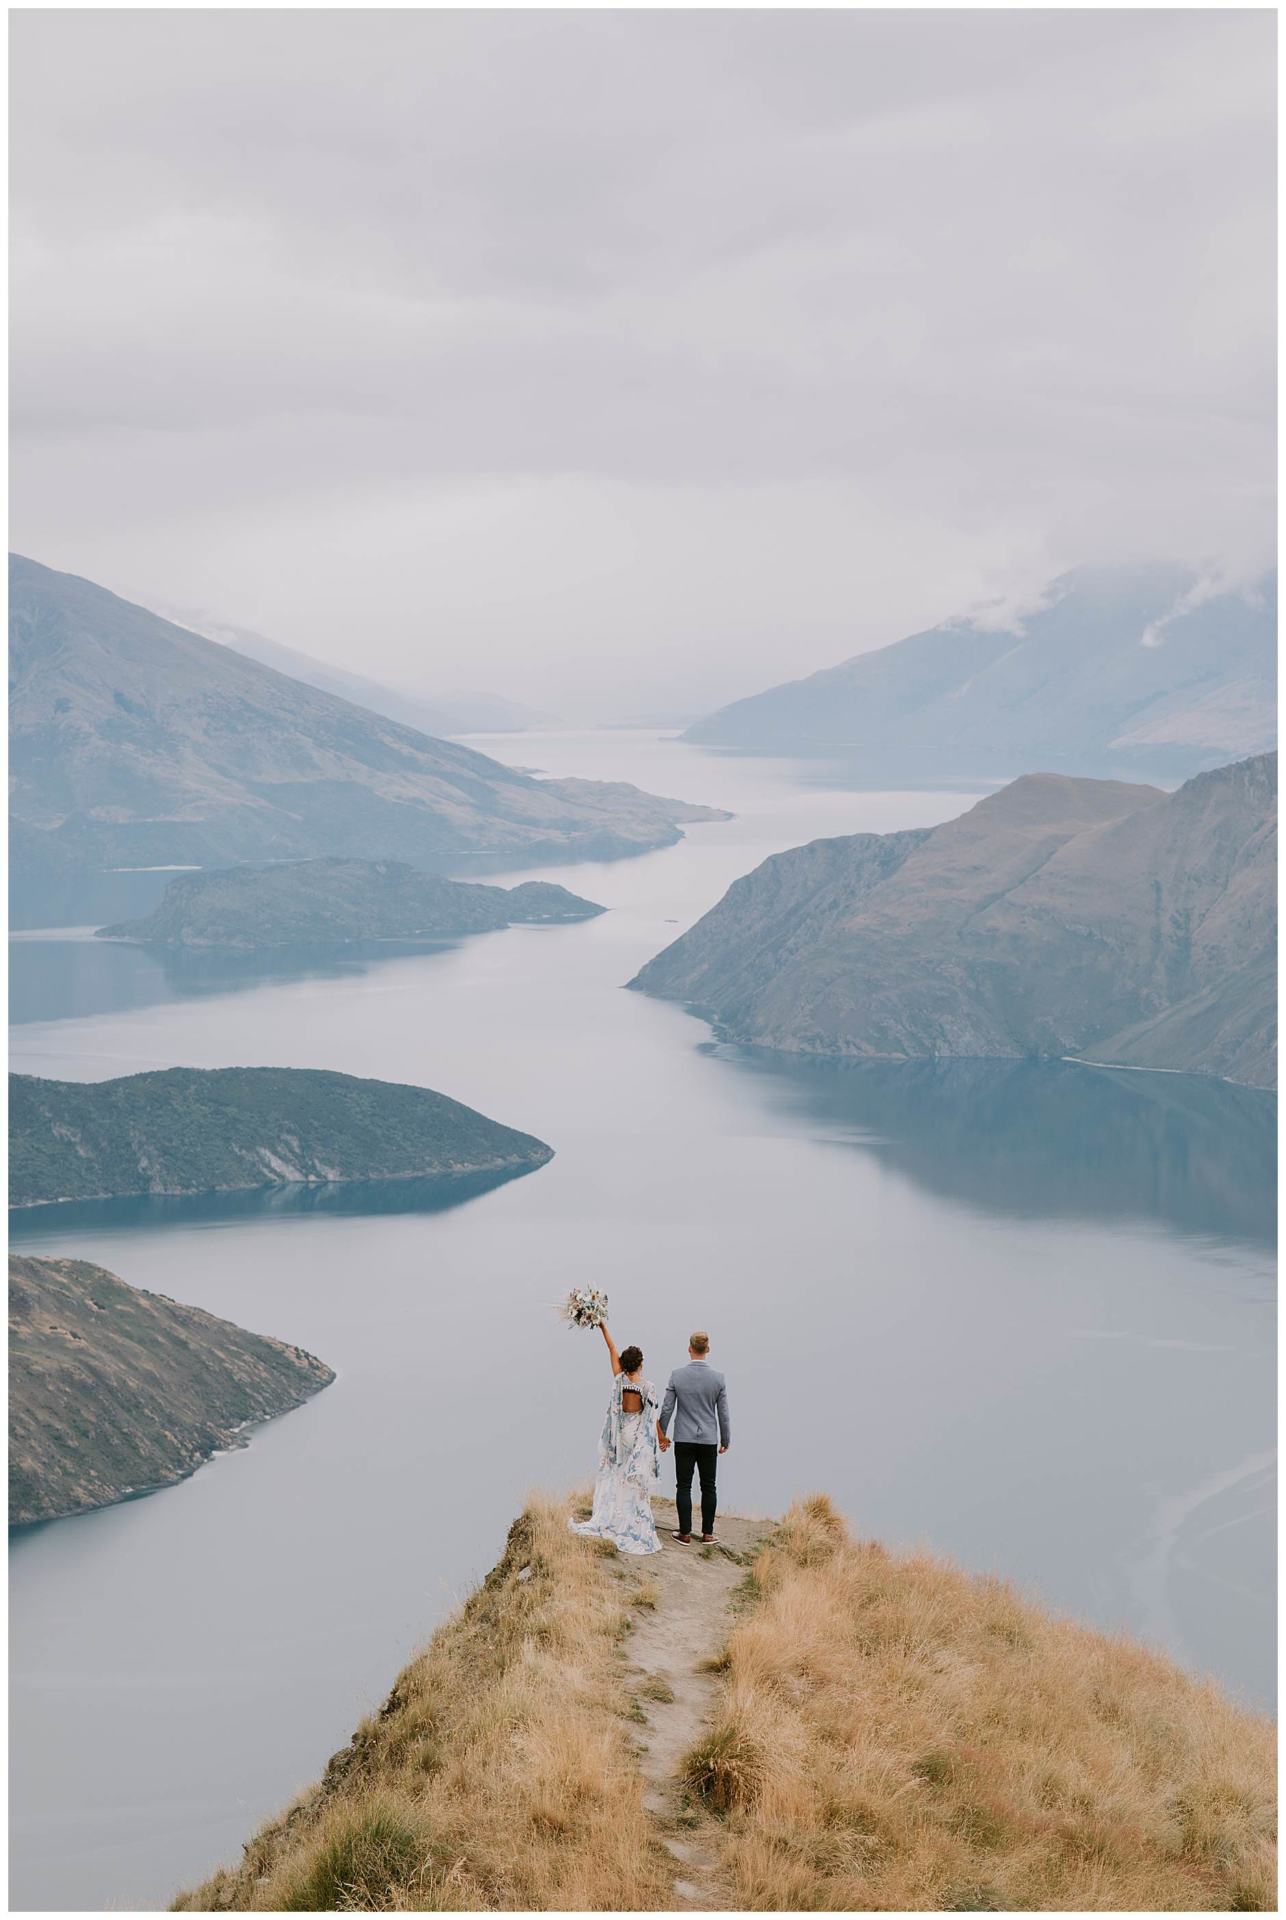 Charlotte Kiri Photography - Elopement Photography with the bride wearing a blue and white sheer floral dress and her bouquet is held high in the air, and the groom in a grey jacket and black pants, standing at the end Coromandel Peak with a backdrop of mountains and glacial lakes behind in Wanaka, New Zealand